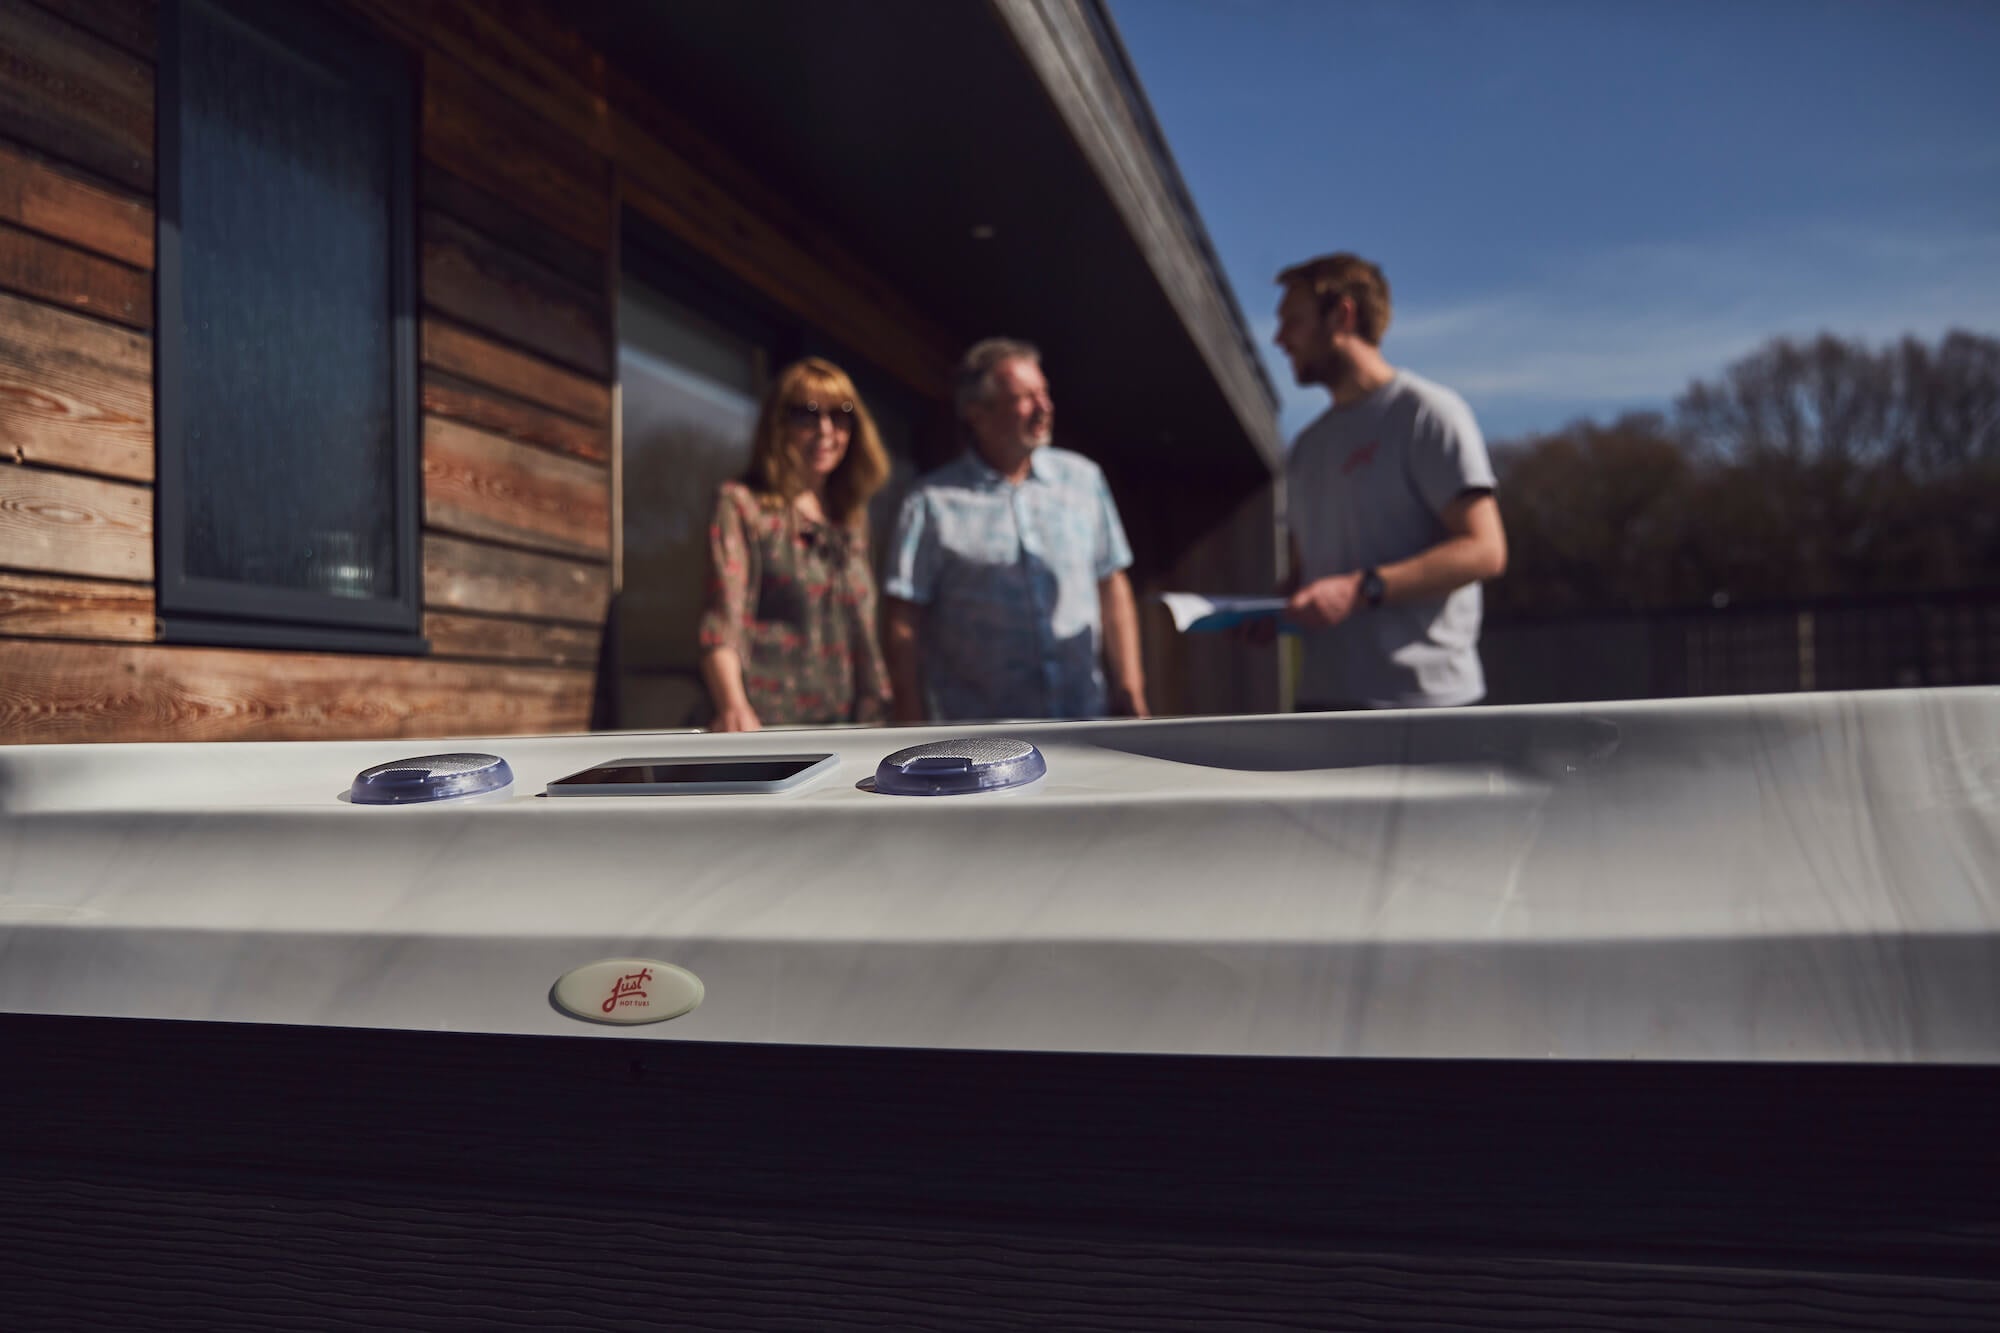 Just Hot Tubs – Who are they and what are they all about?